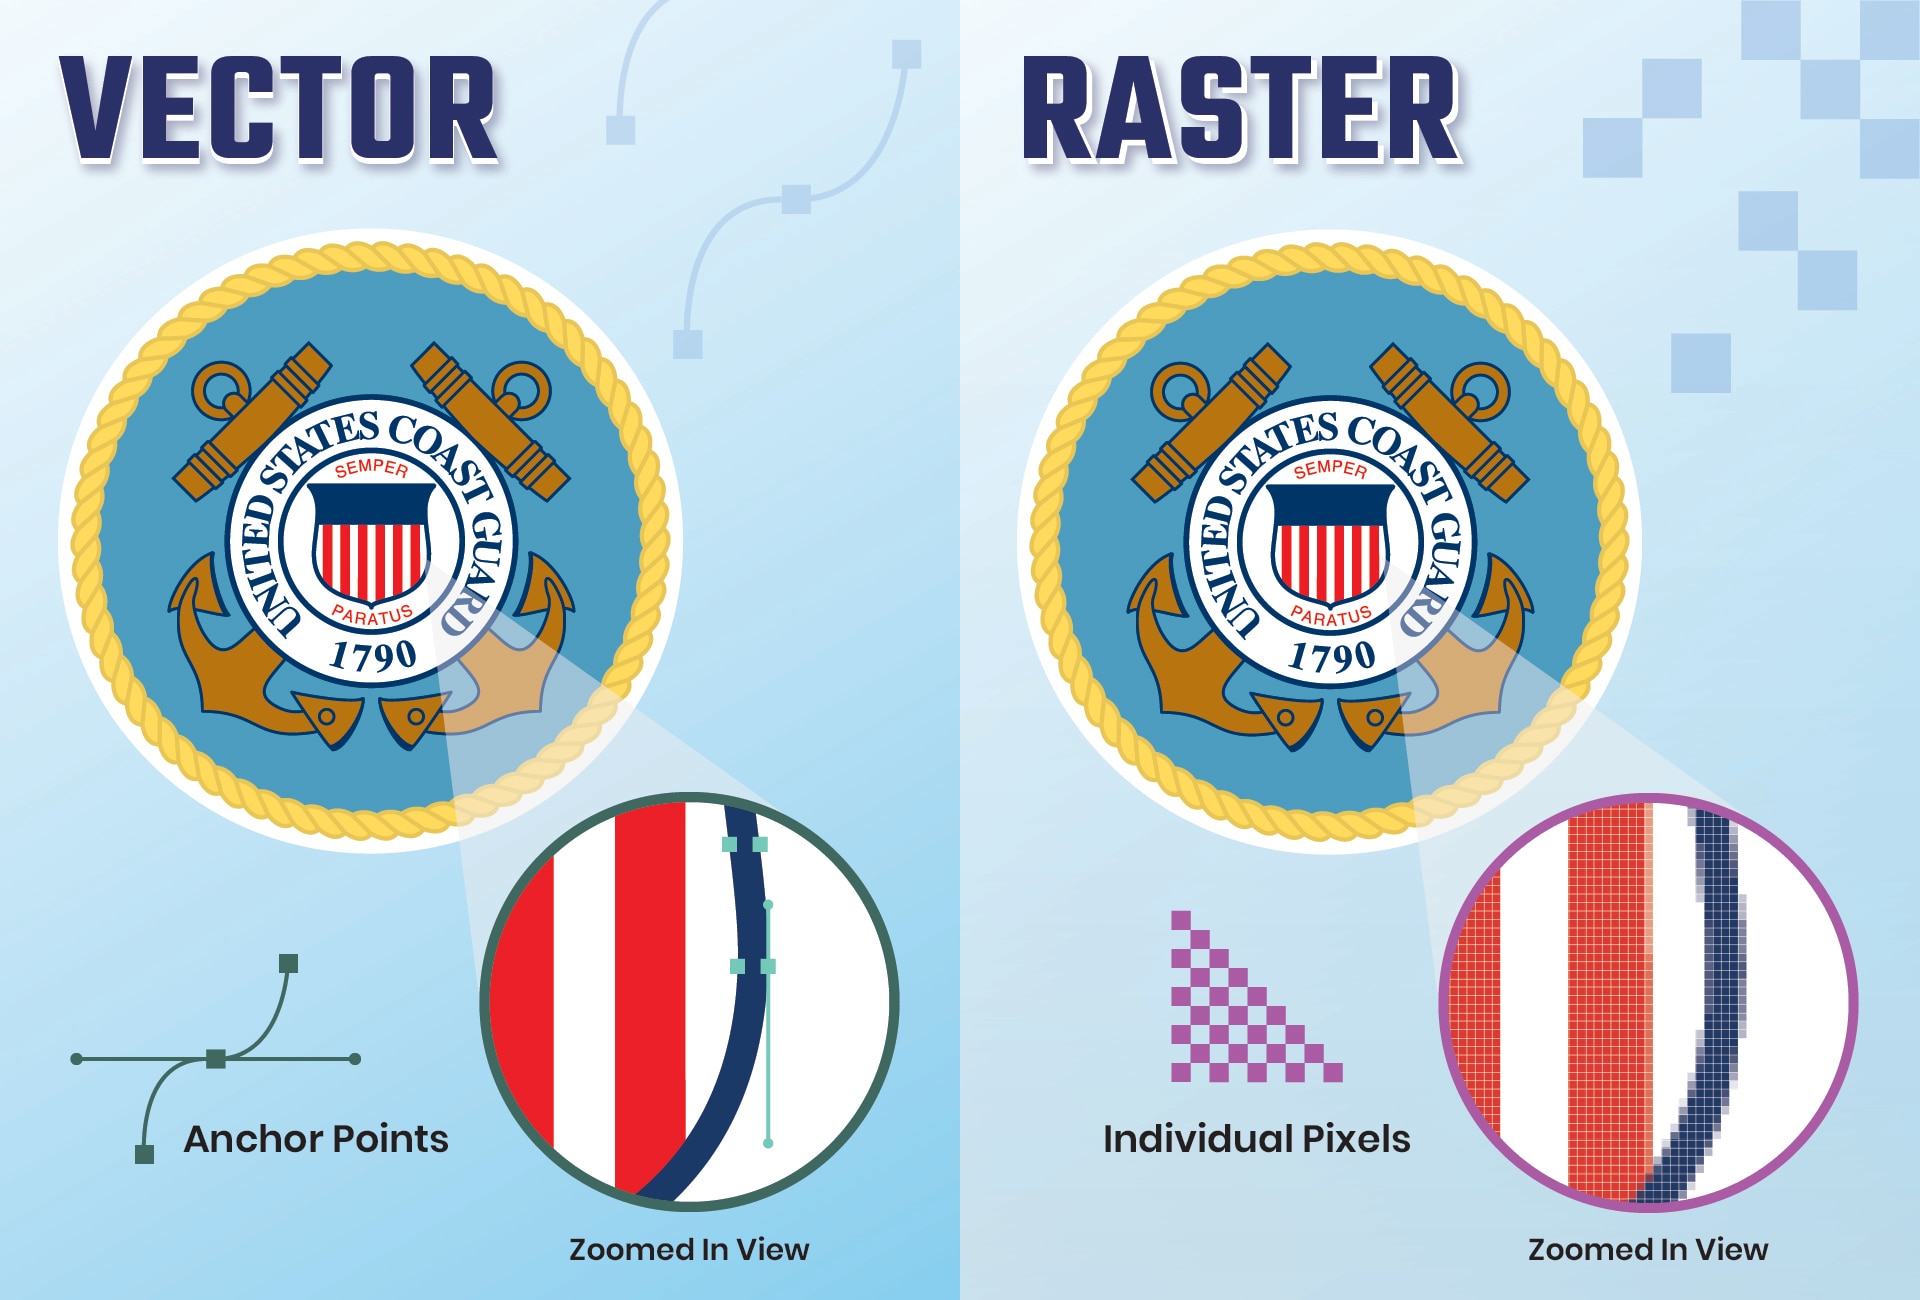 A comparison of a vector image versus a raster image.